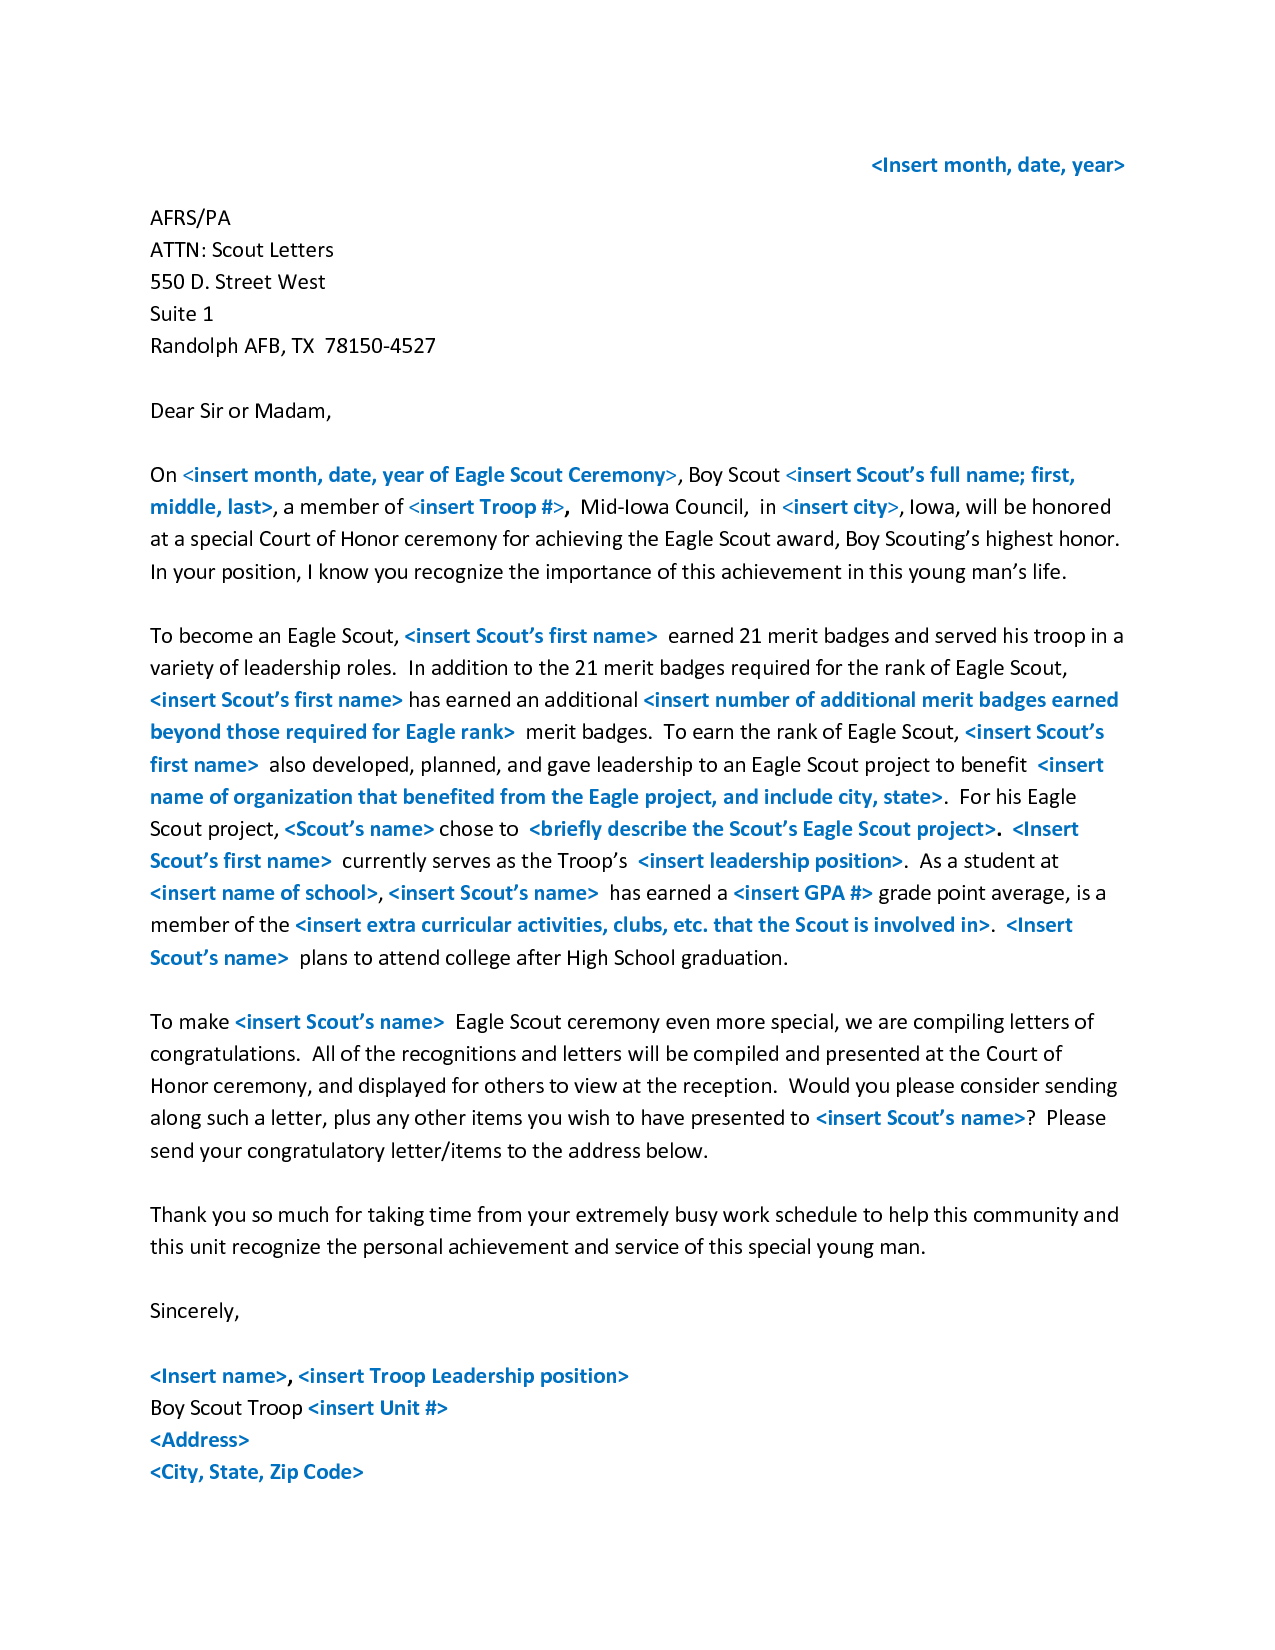 Eagle Scout Letter Of Recommendation Yahoo Image Search with dimensions 1275 X 1650